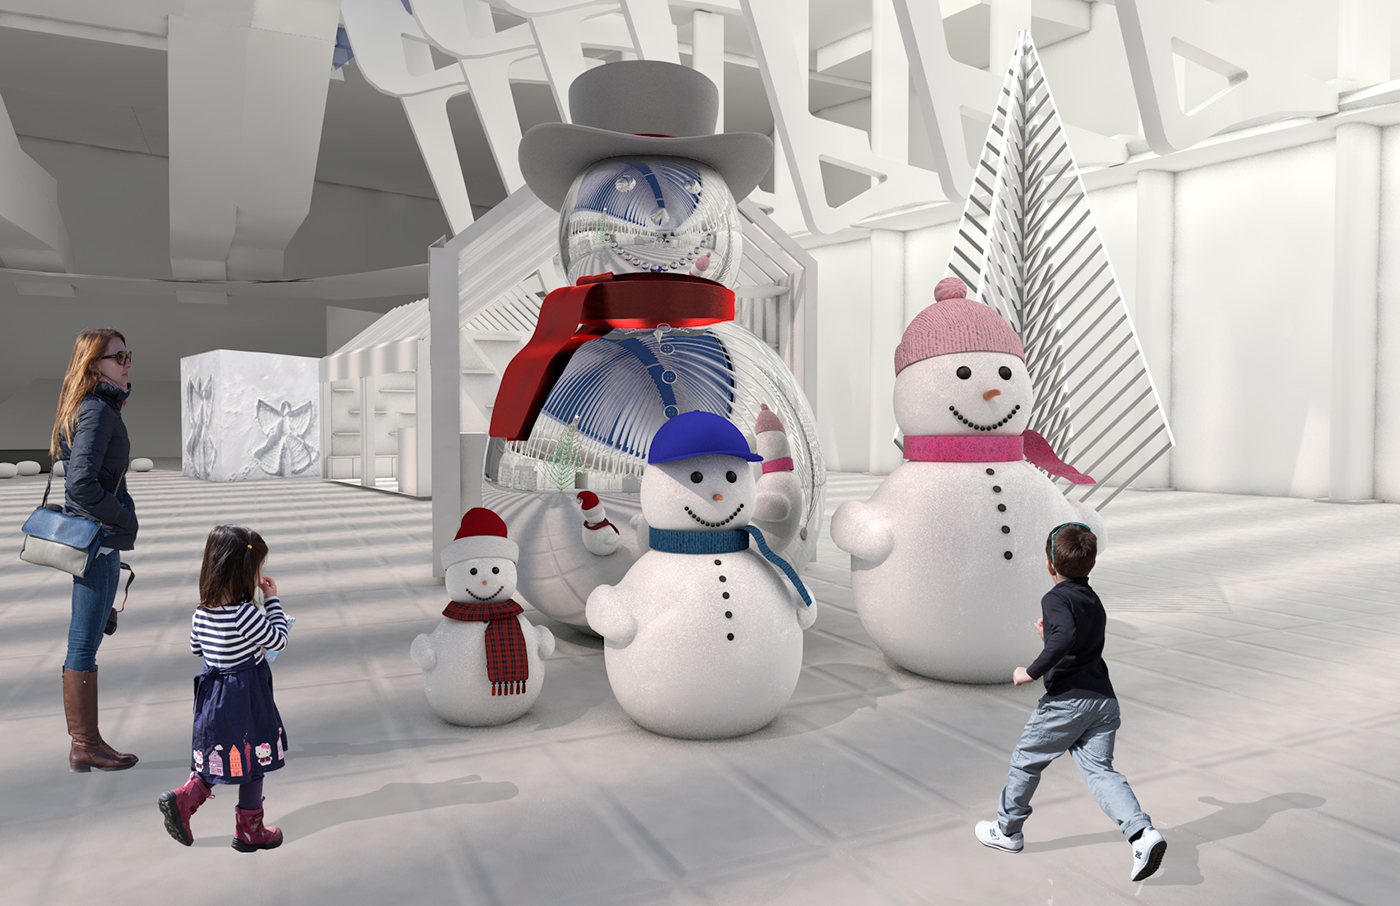 experience design cinema 4d Experiential sculpture Holiday Market photo op